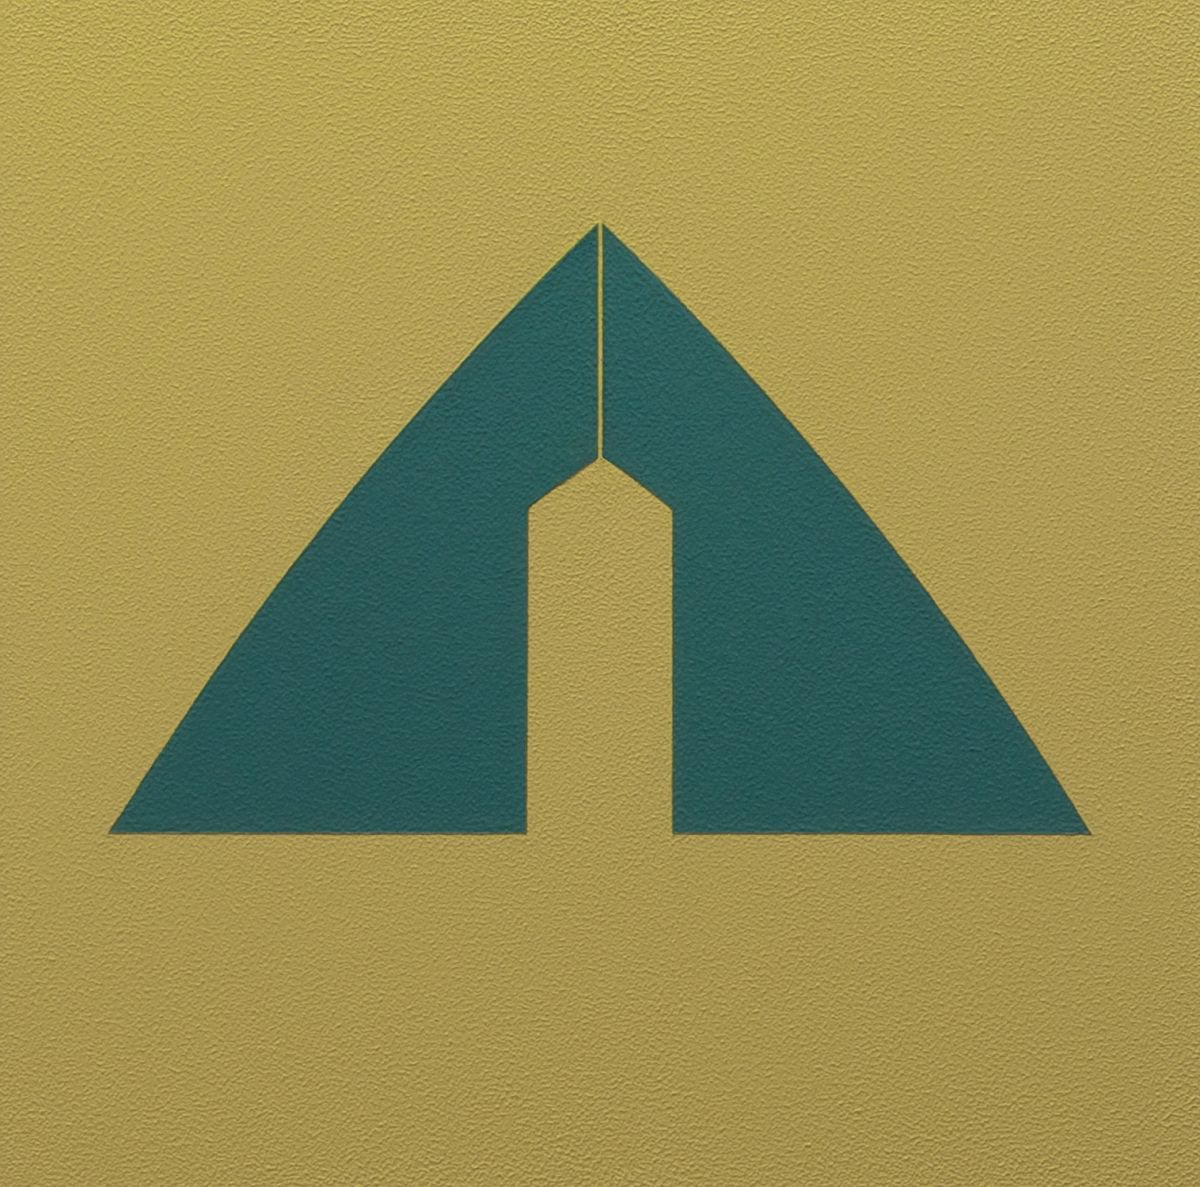 APOGEE - Minimal / Modernist Painting by Rich Moyers